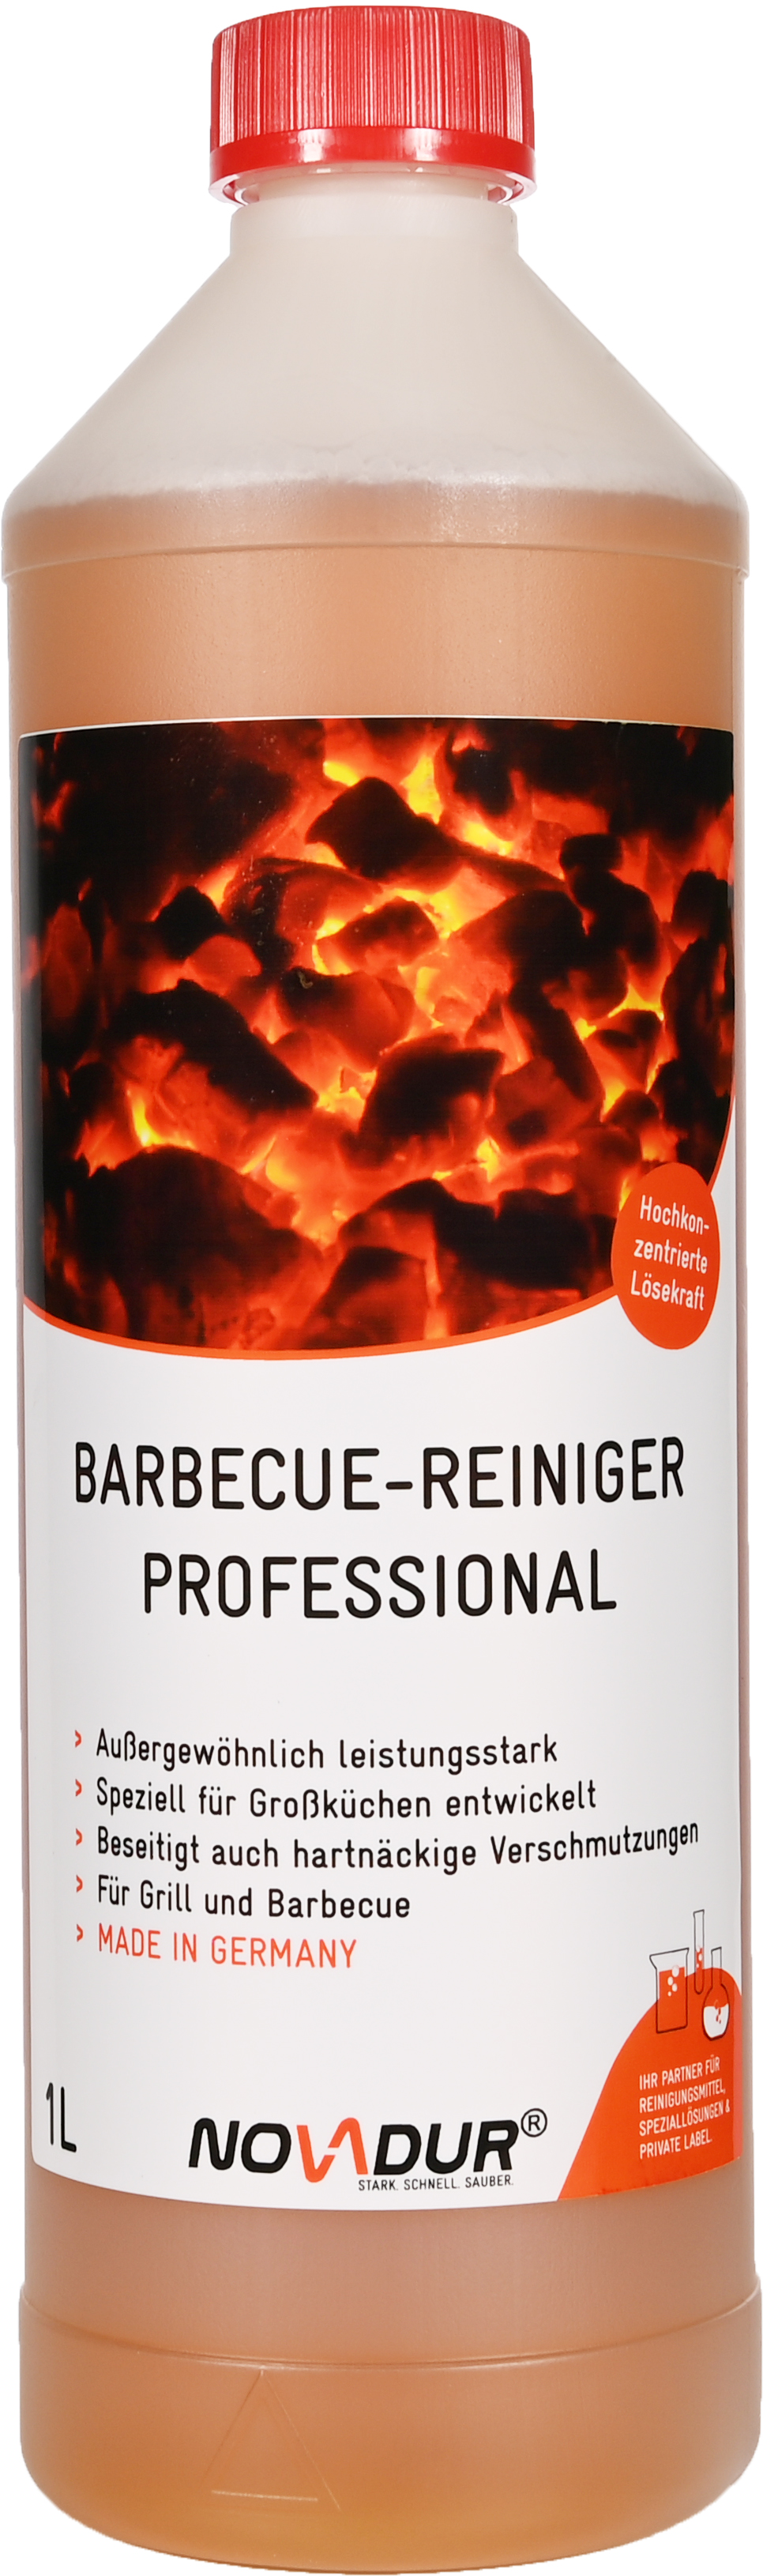 Barbecue-Reiniger Professional 